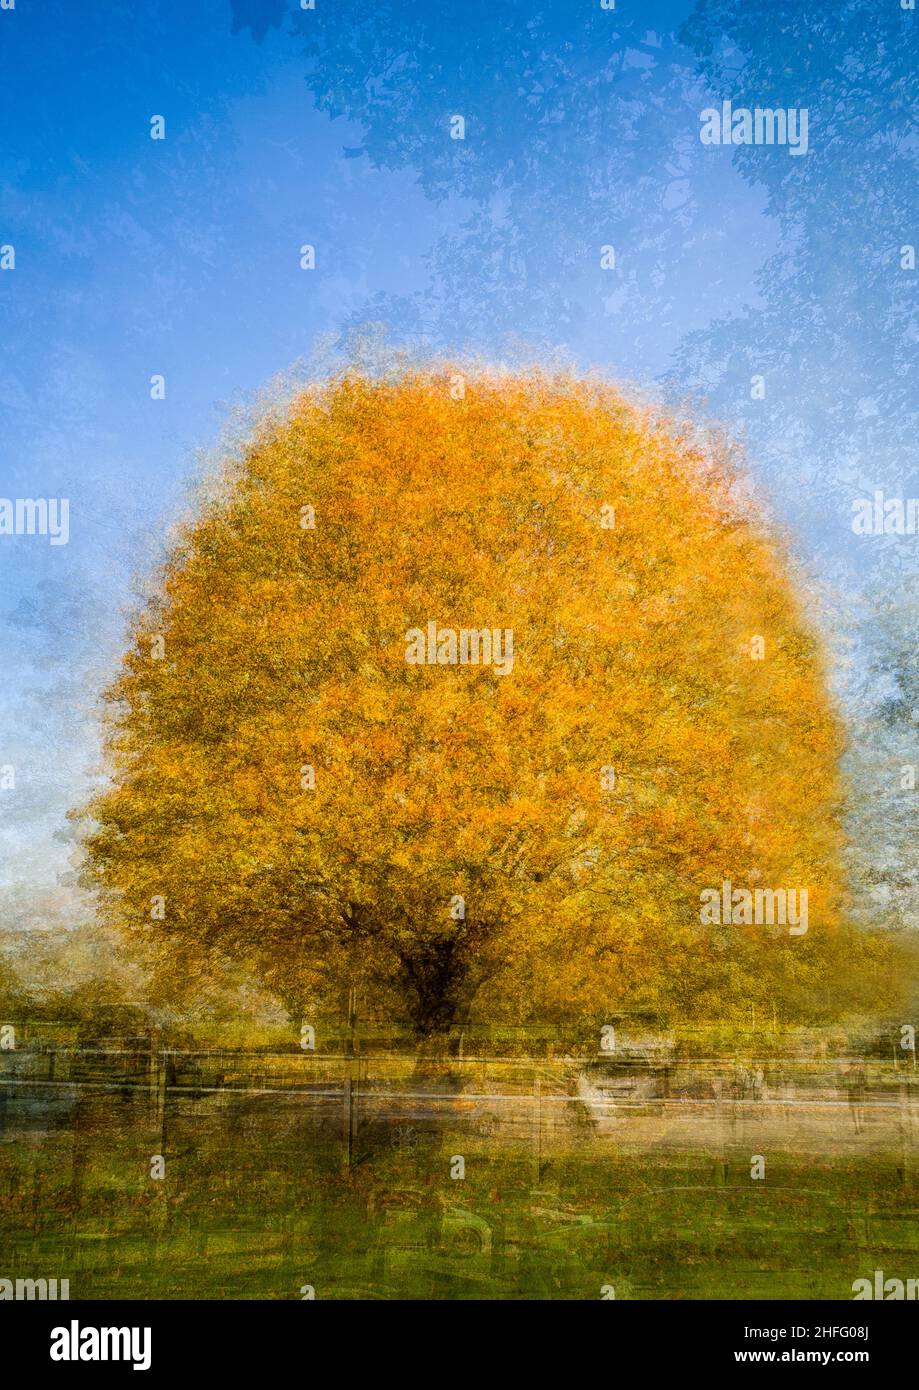 Multiple exposure photograph of an oak tree in autumn giving an impressionist image. Stock Photo